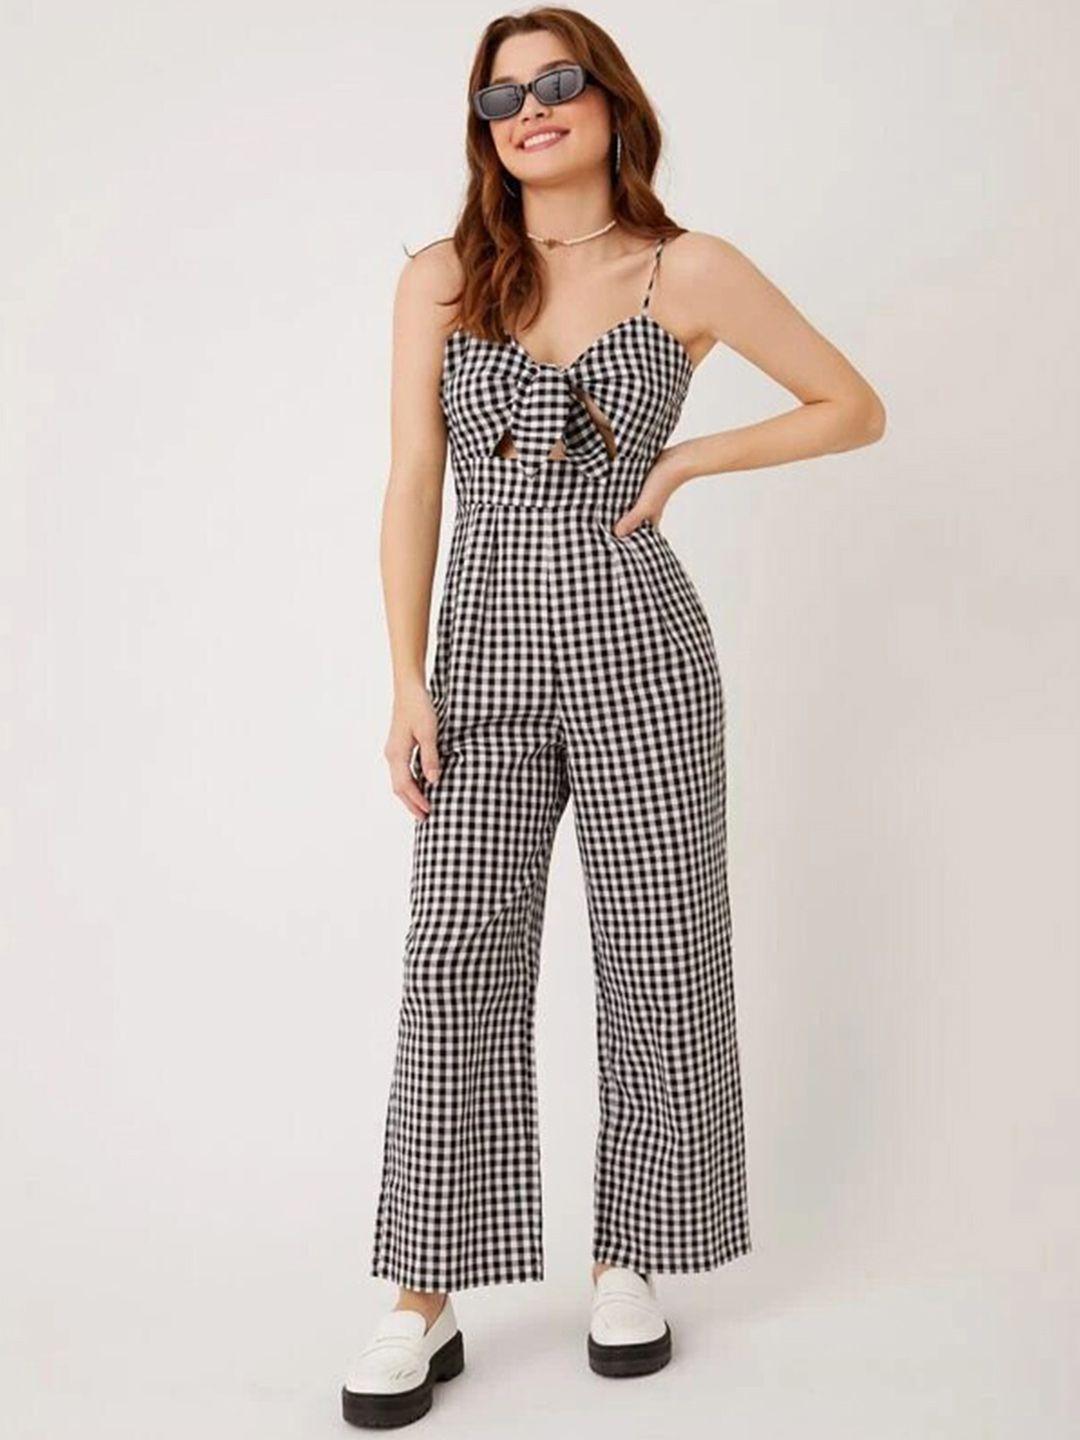 baesd checked basic jumpsuit